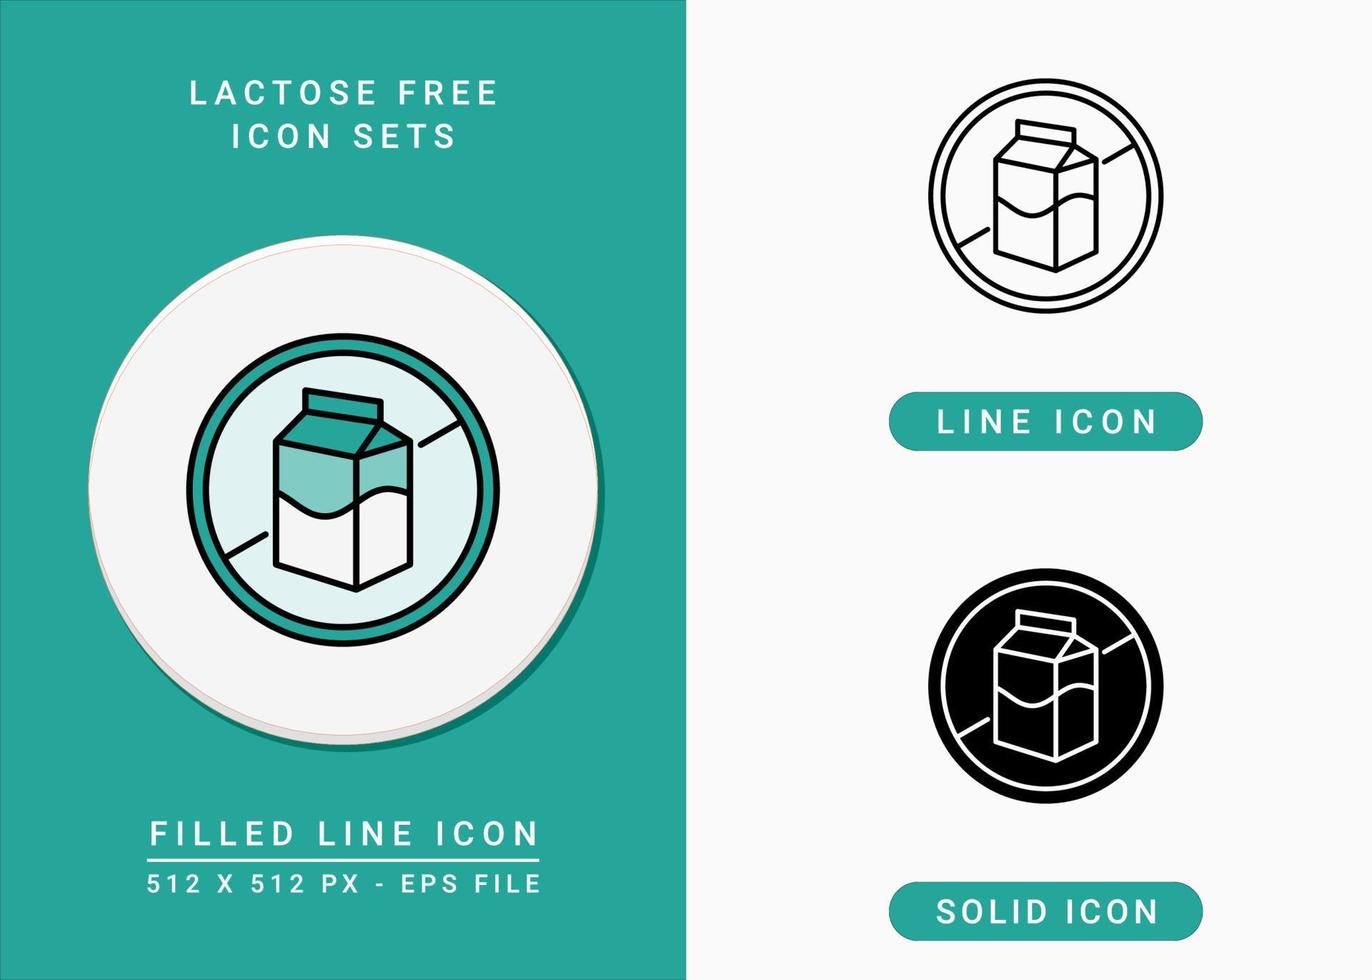 Lactose free icons set vector illustration with solid icon line style. Cow milk box ban concept. Editable stroke icon on isolated white background for web design, infographic and UI mobile app.